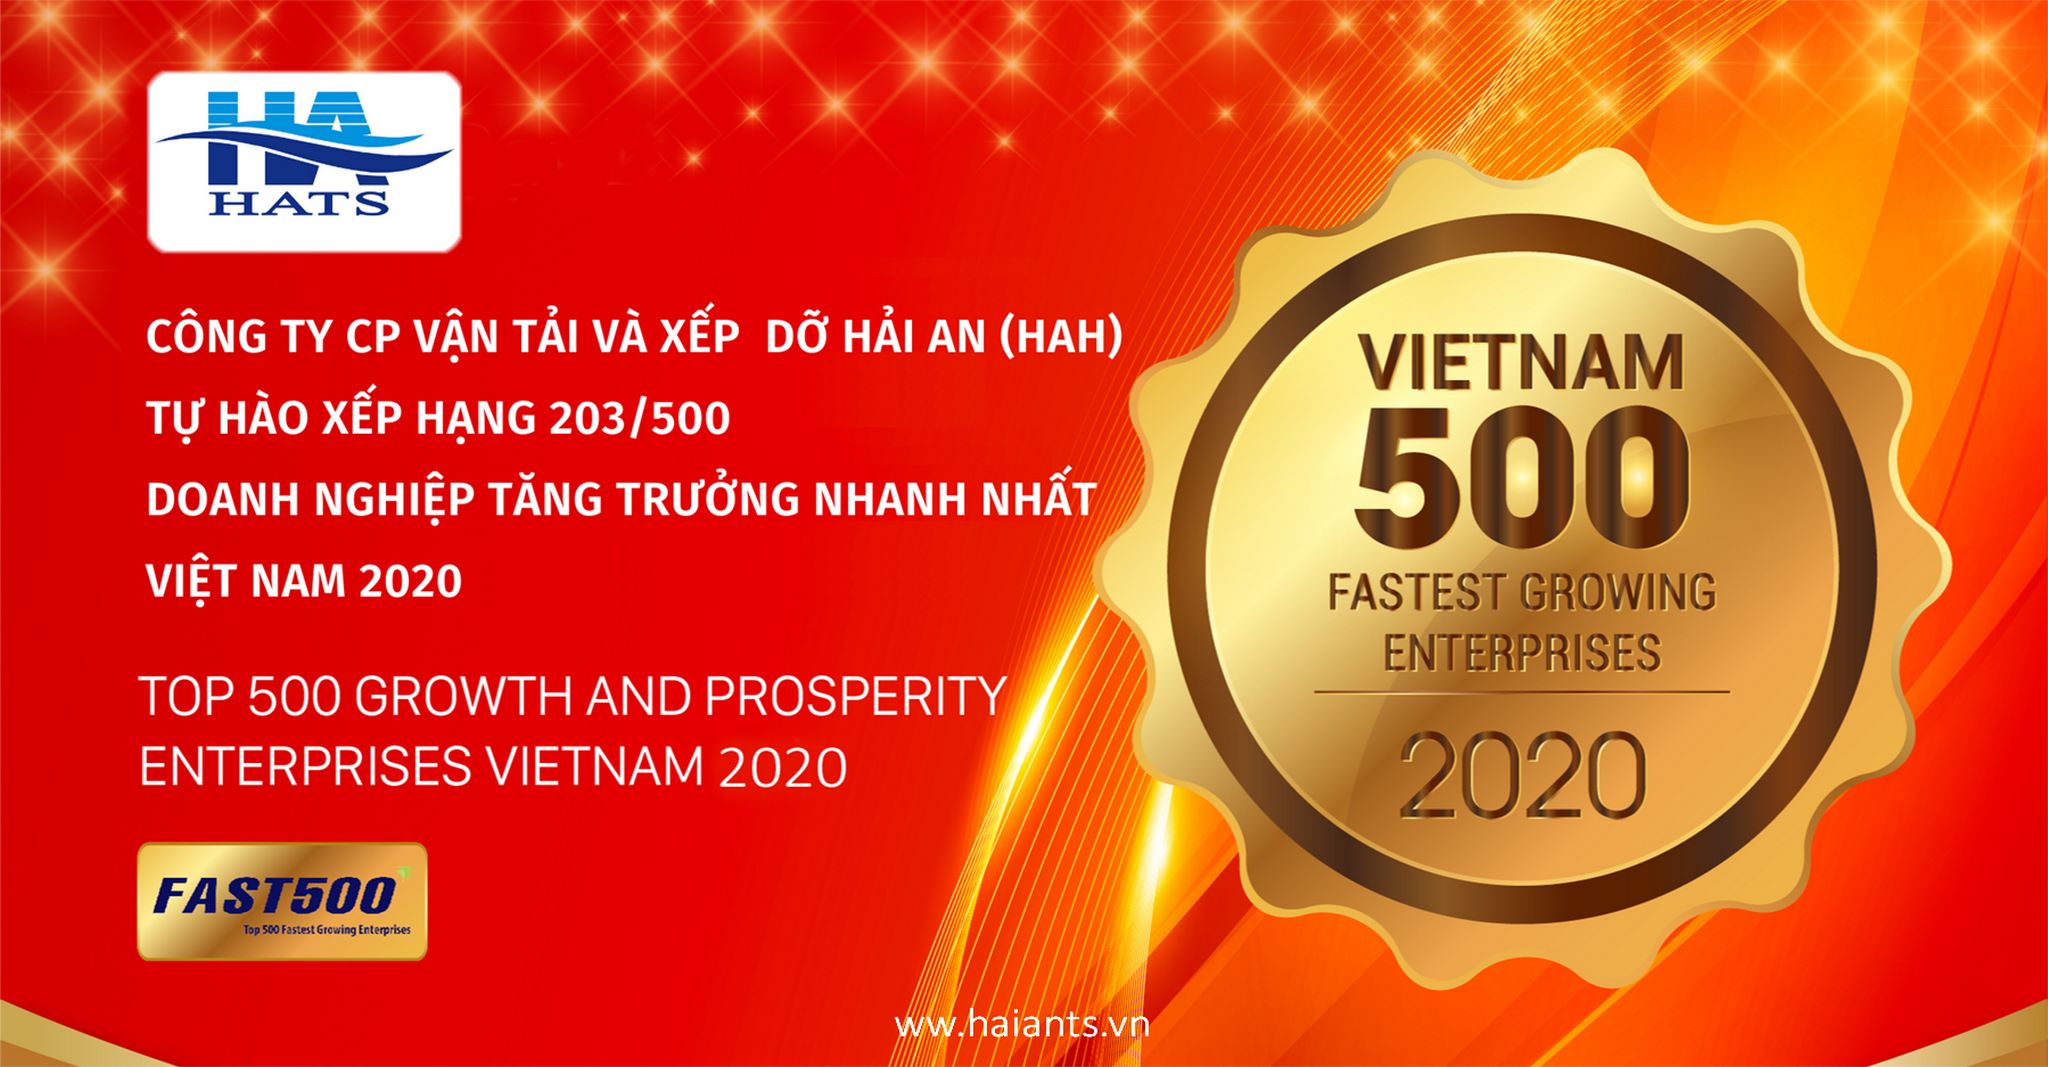 Haian Transport And Stevedoring Company Limited ranked significantly in the top 500 fastest growing enterprises in Vietnam in 2020 – FAST500